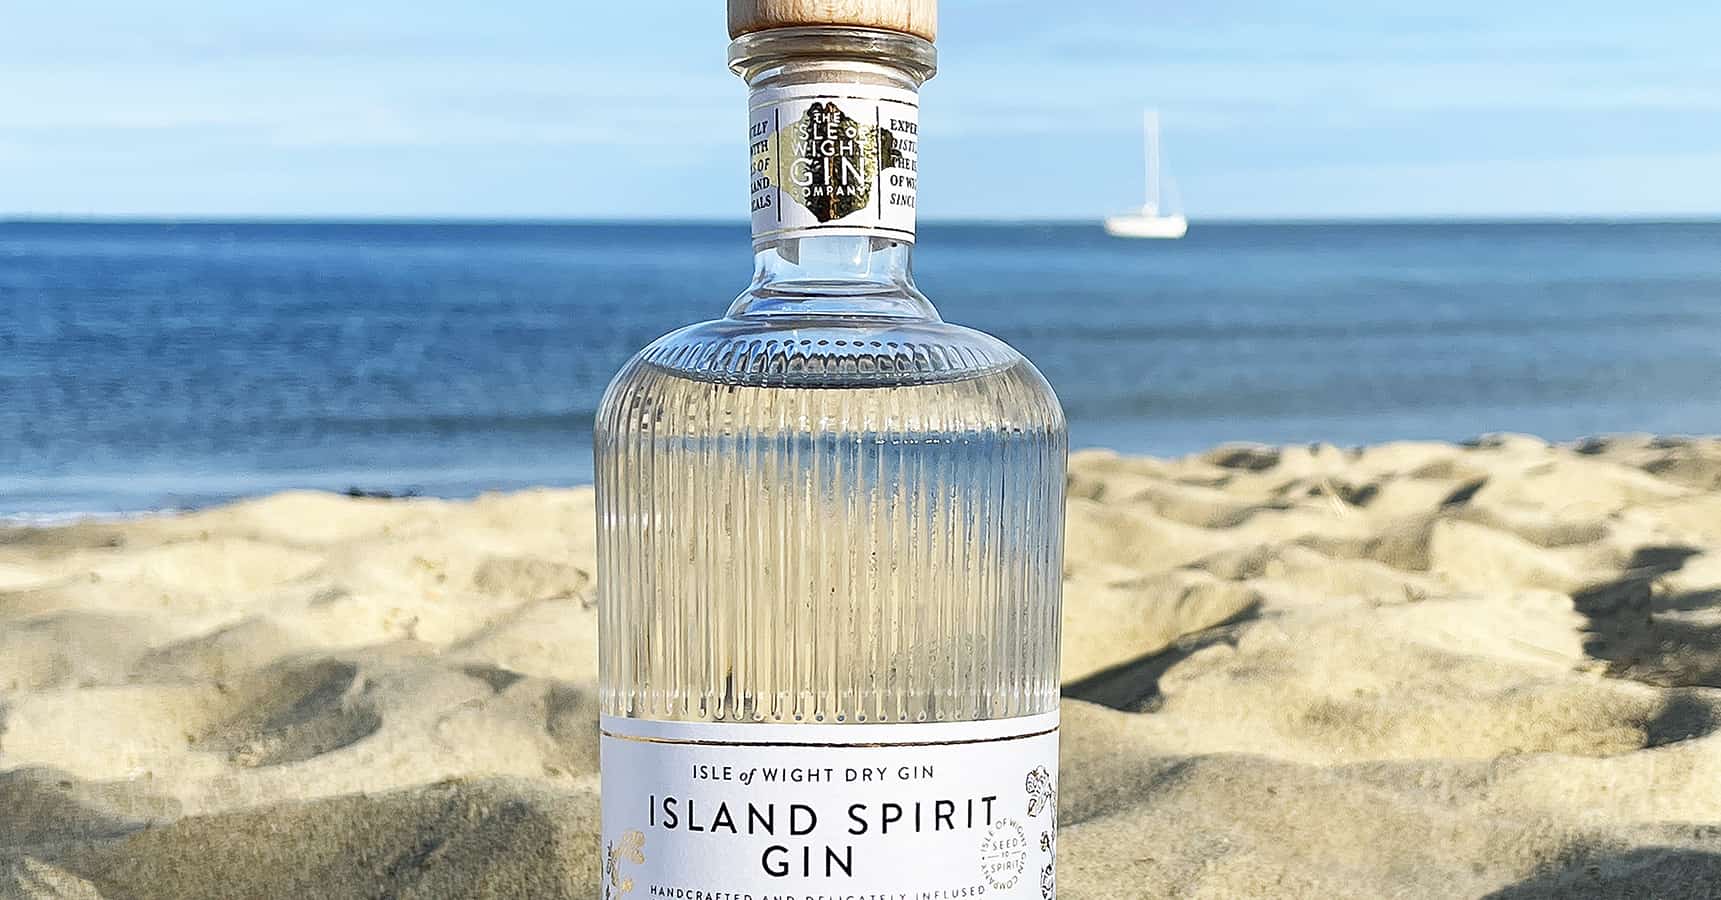 Isle of Wight gin bottle on the beach with sea in the background